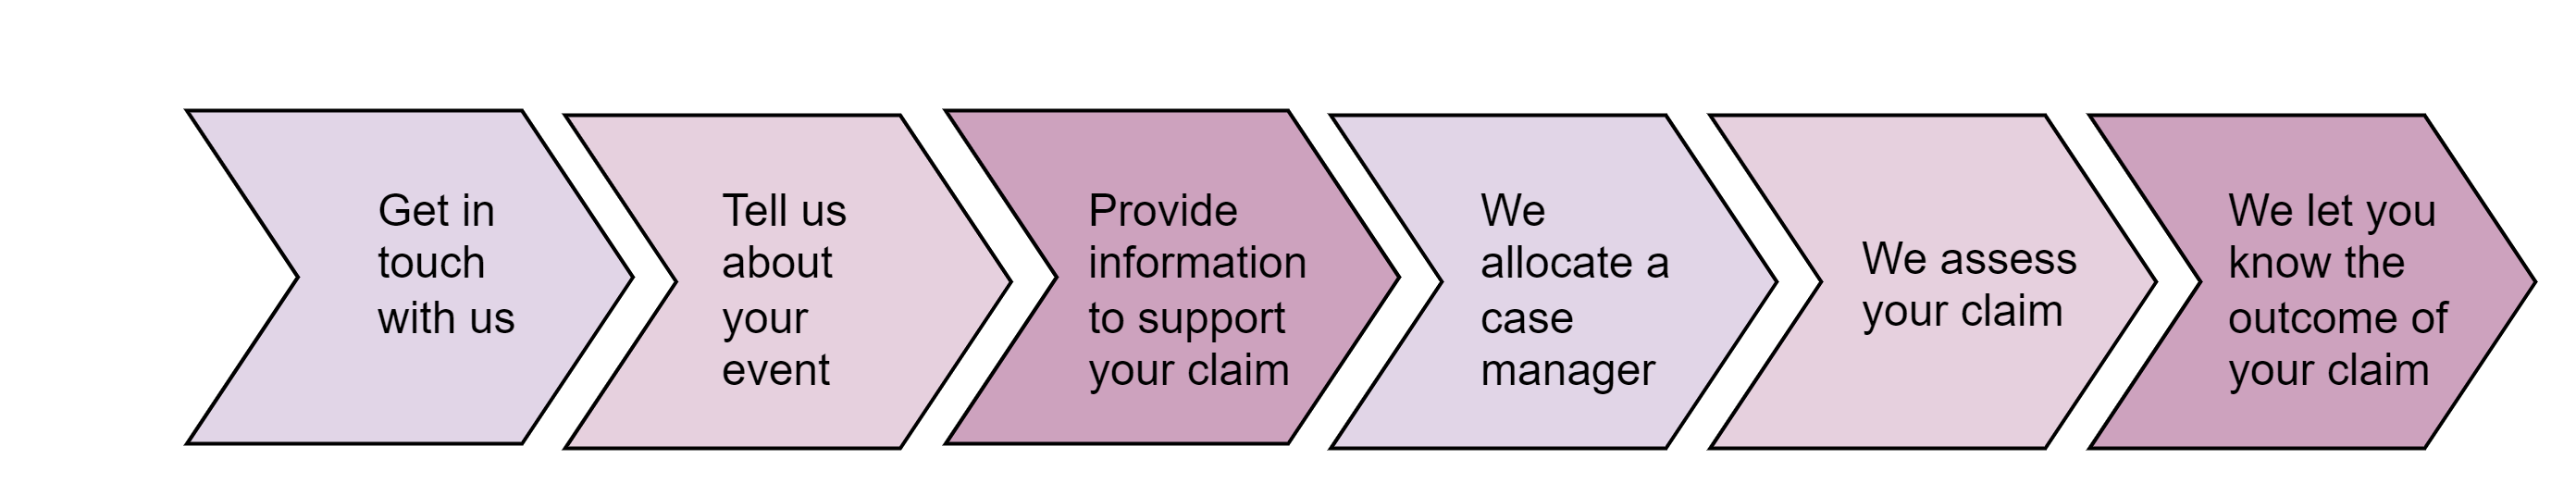 Initiate your claim, tell us about your event/situation, provide information to support your claim, we allocate a case manager, we assess your claim, we let you know the outcome of your claim